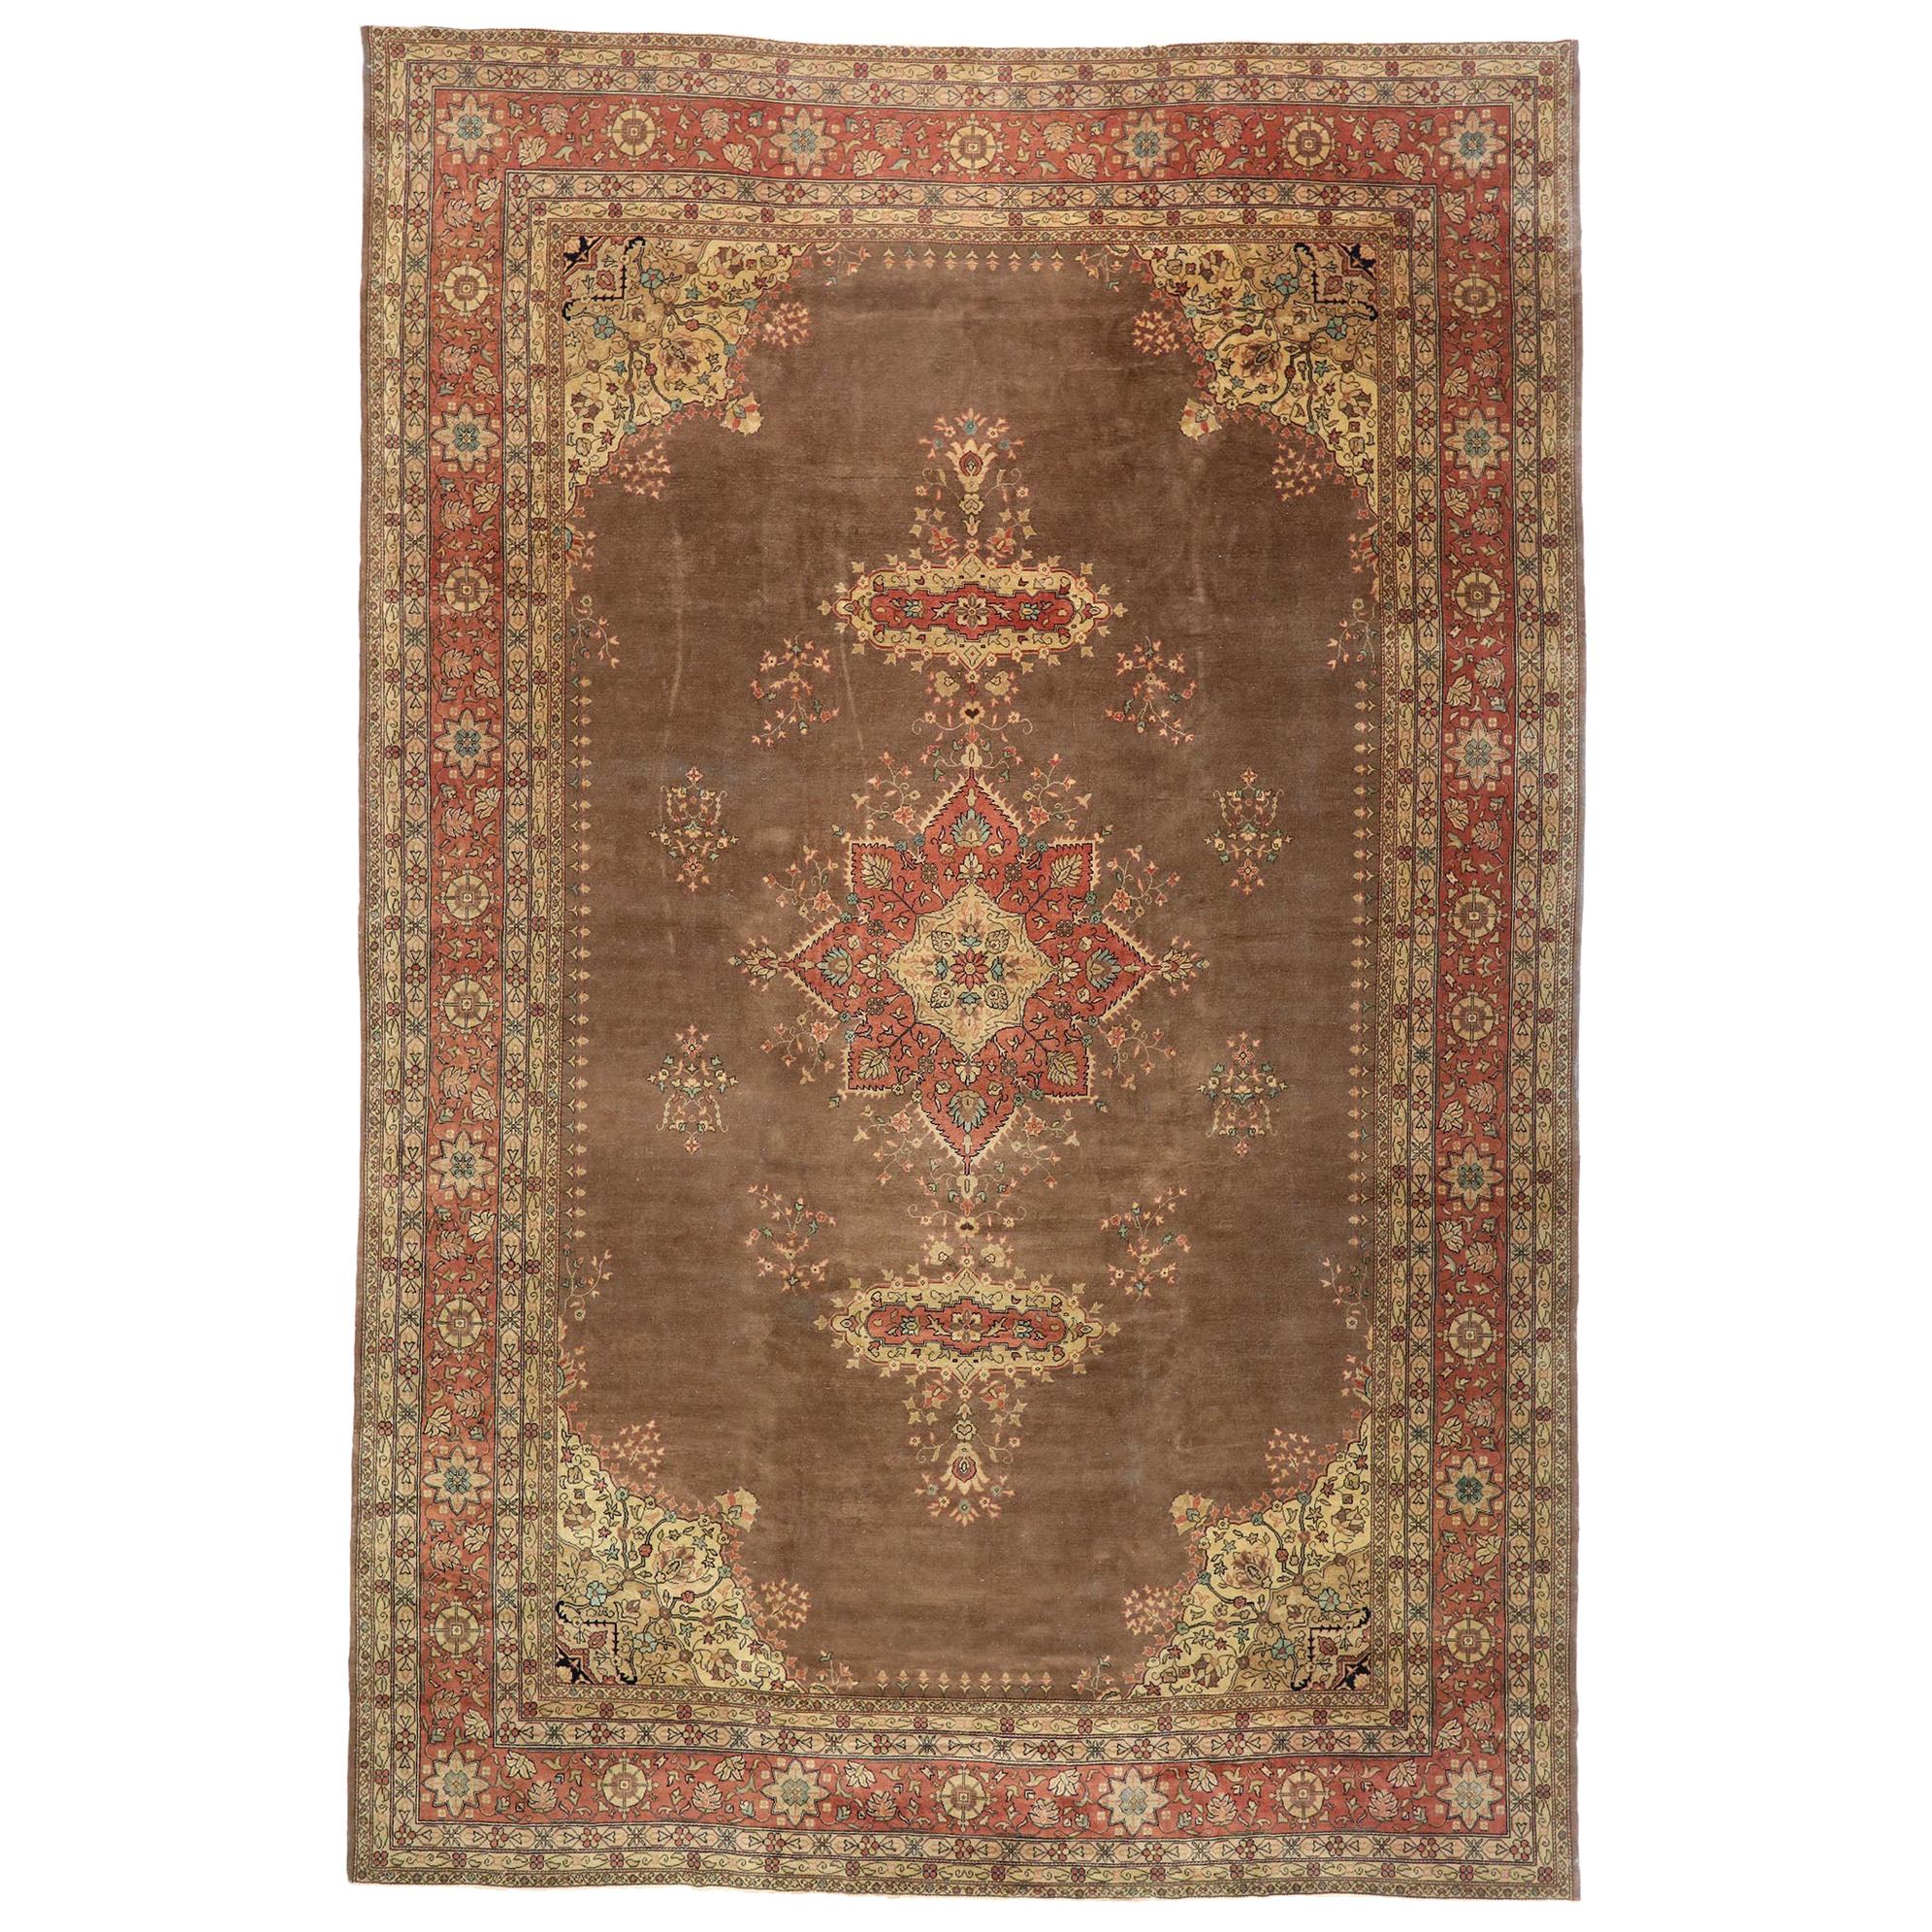 Antique Romanian Palace Size Rug with Rustic Victorian Style